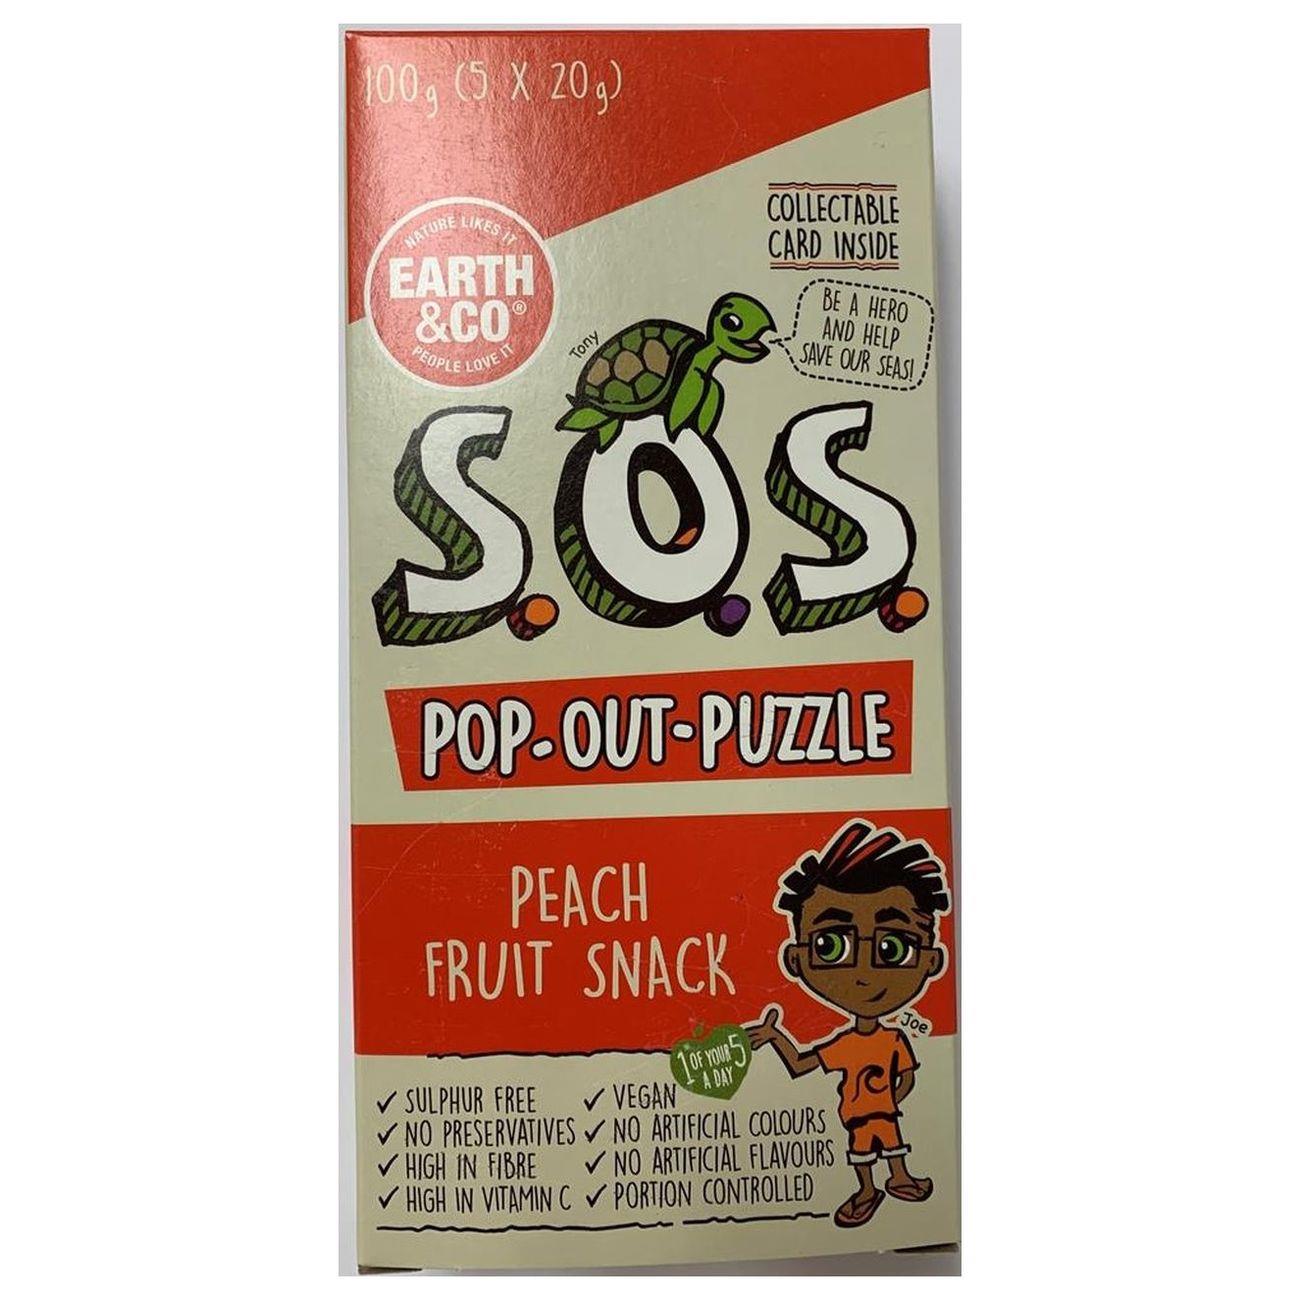 Peach Dried Fruit Snack Pop-Out-Puzzle 5x20g